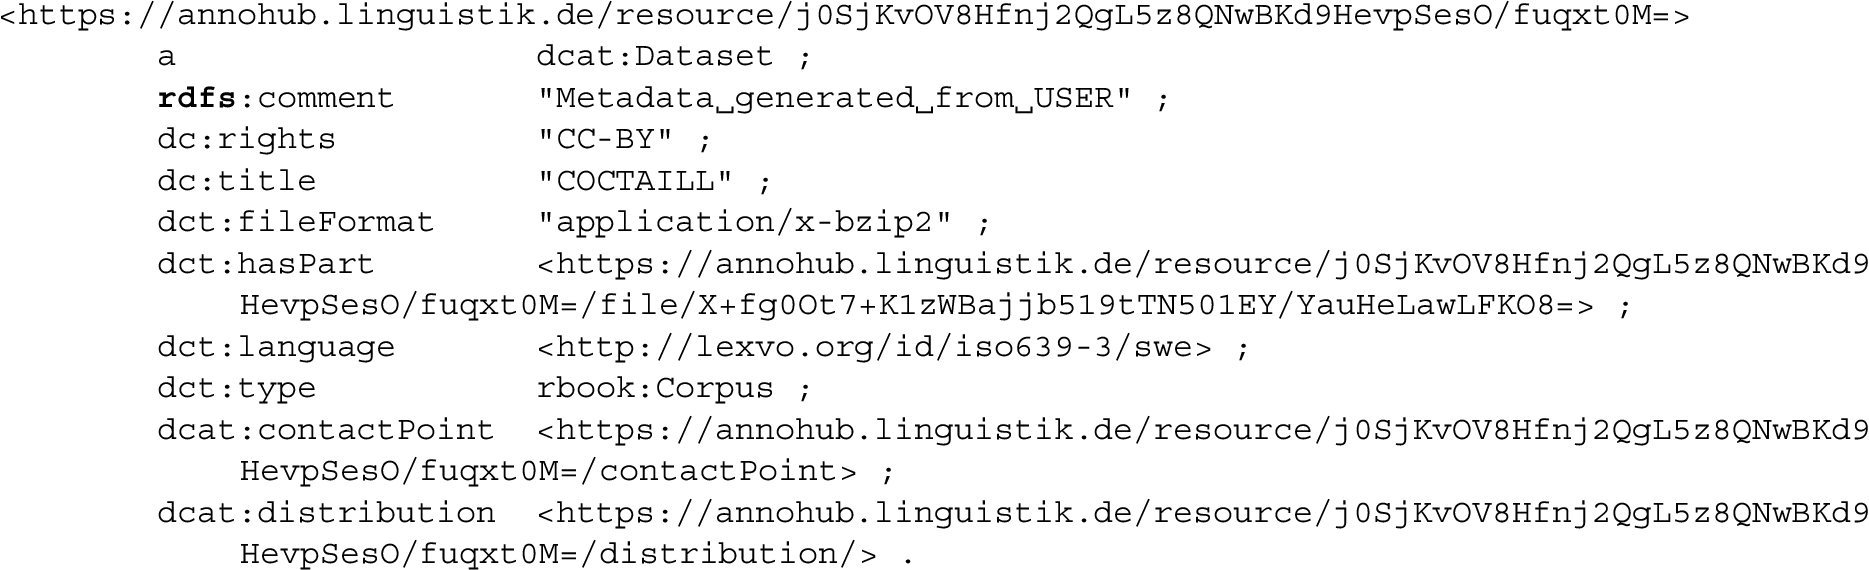 Example from Annohub dumped data